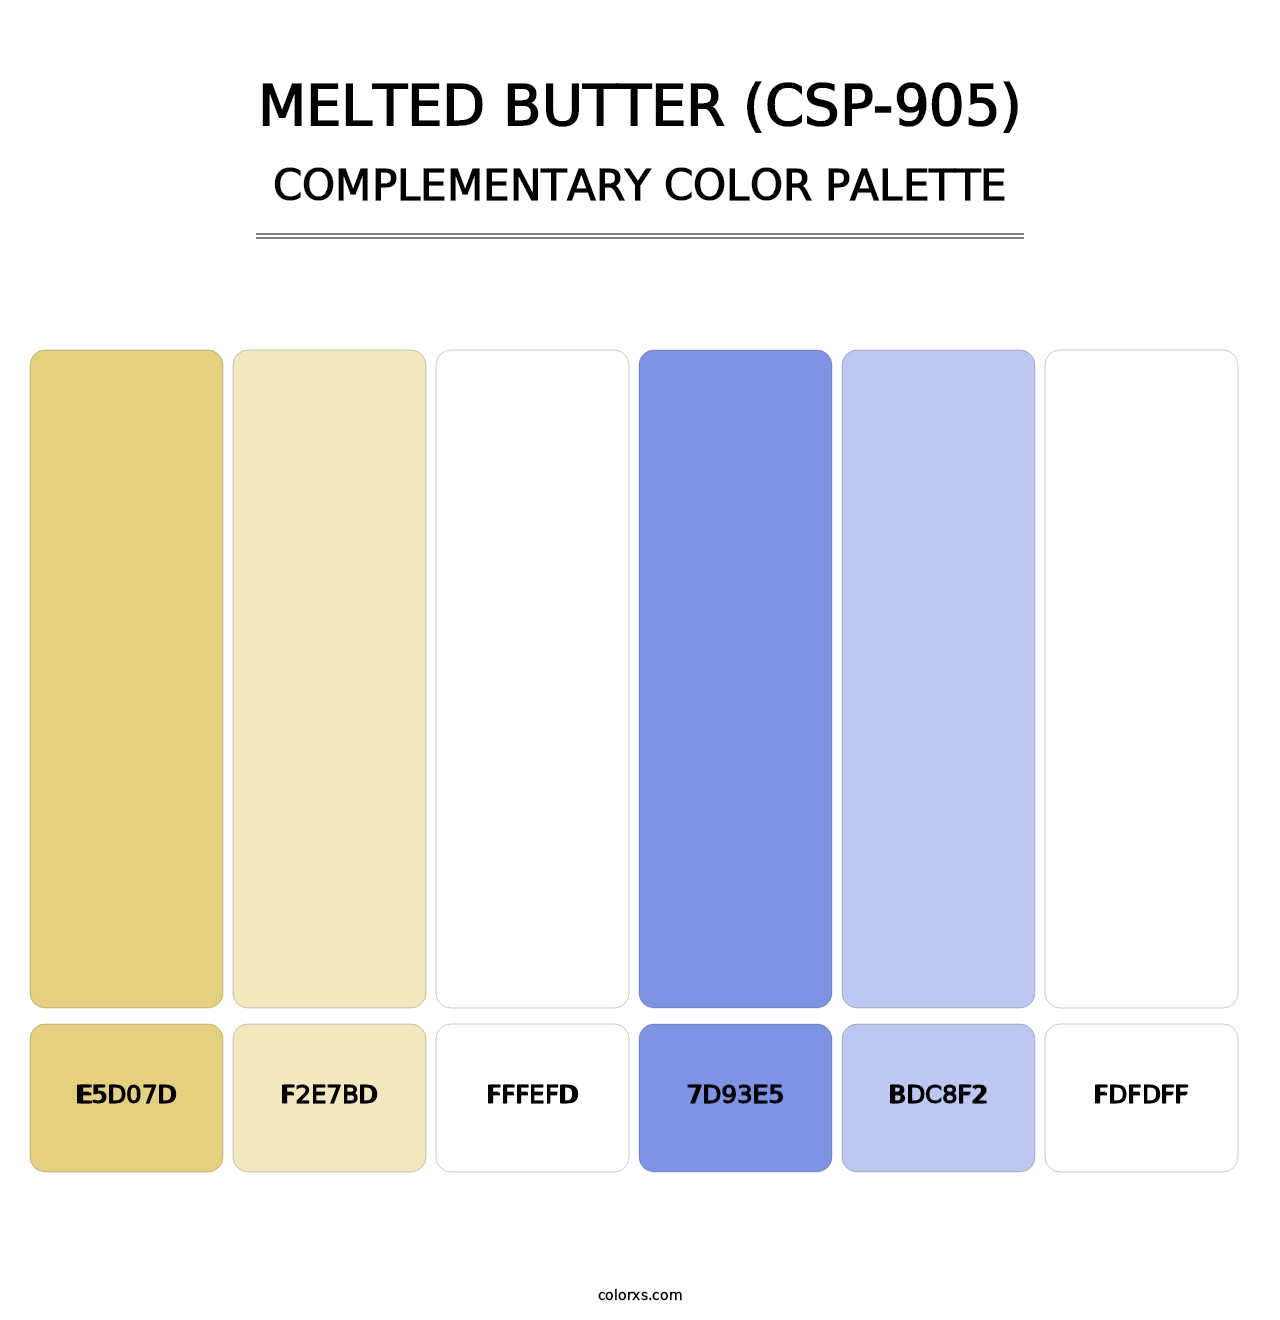 Melted Butter (CSP-905) - Complementary Color Palette